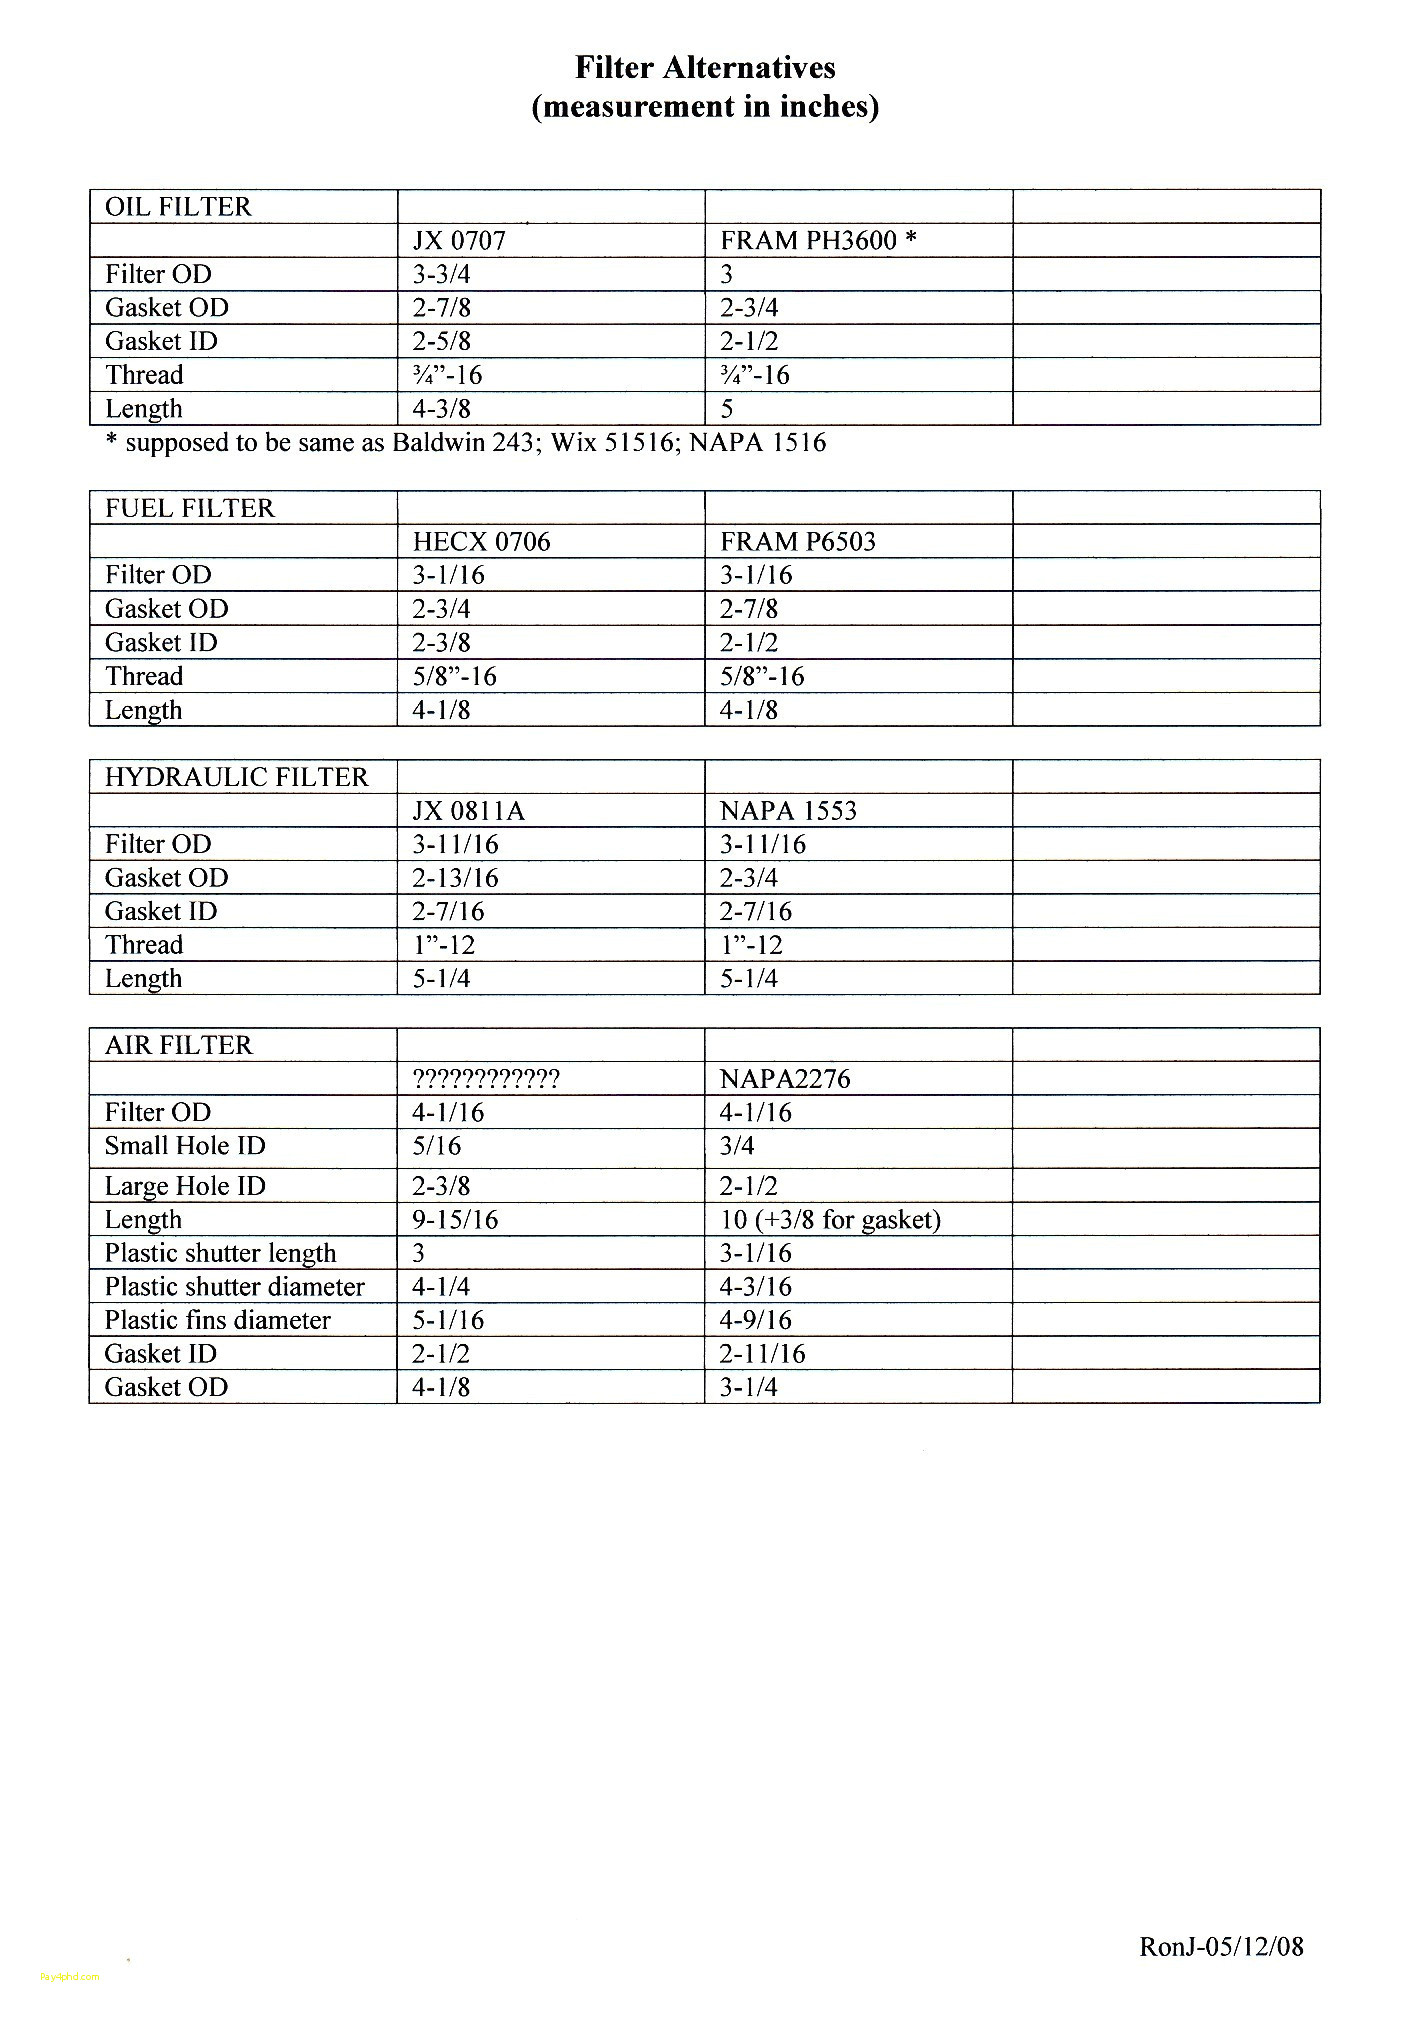 generac oil filter cross reference chart new 30 beautiful generac oil filter cross reference chart